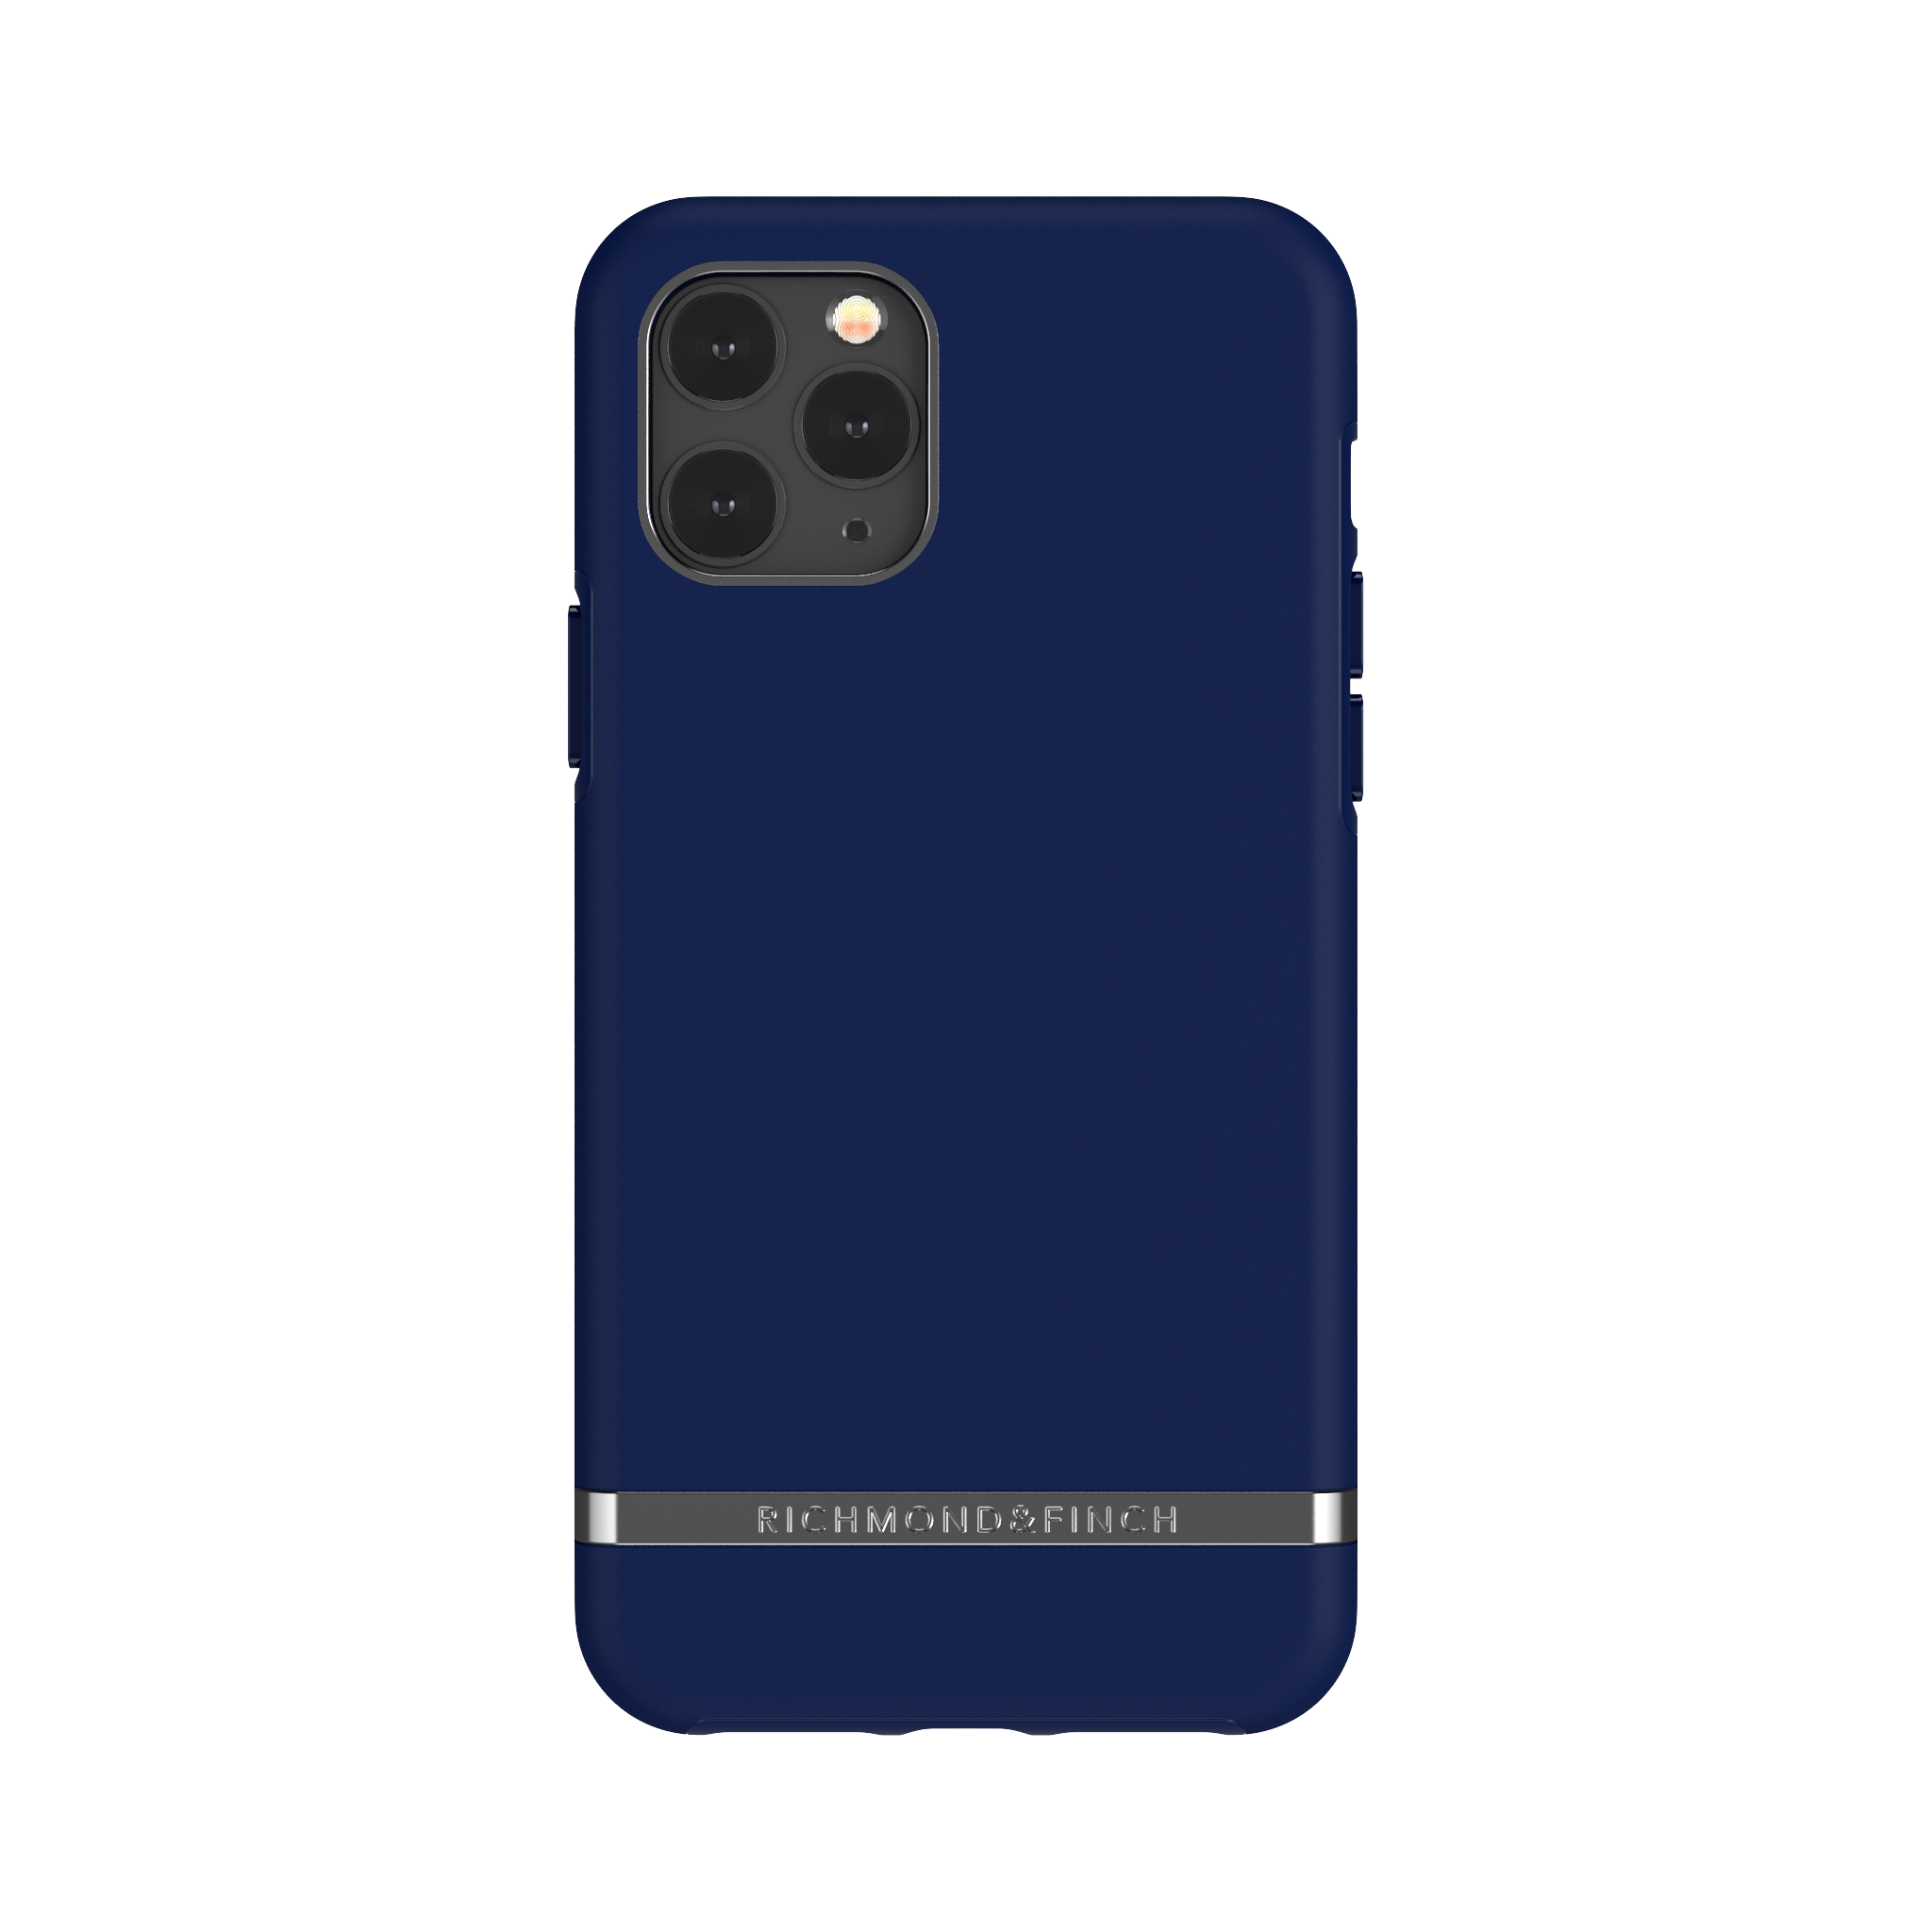 RICHMOND & FINCH Navy iPhone BLUE Pro, APPLE, Backcover, PRO, IPHONE 11 11